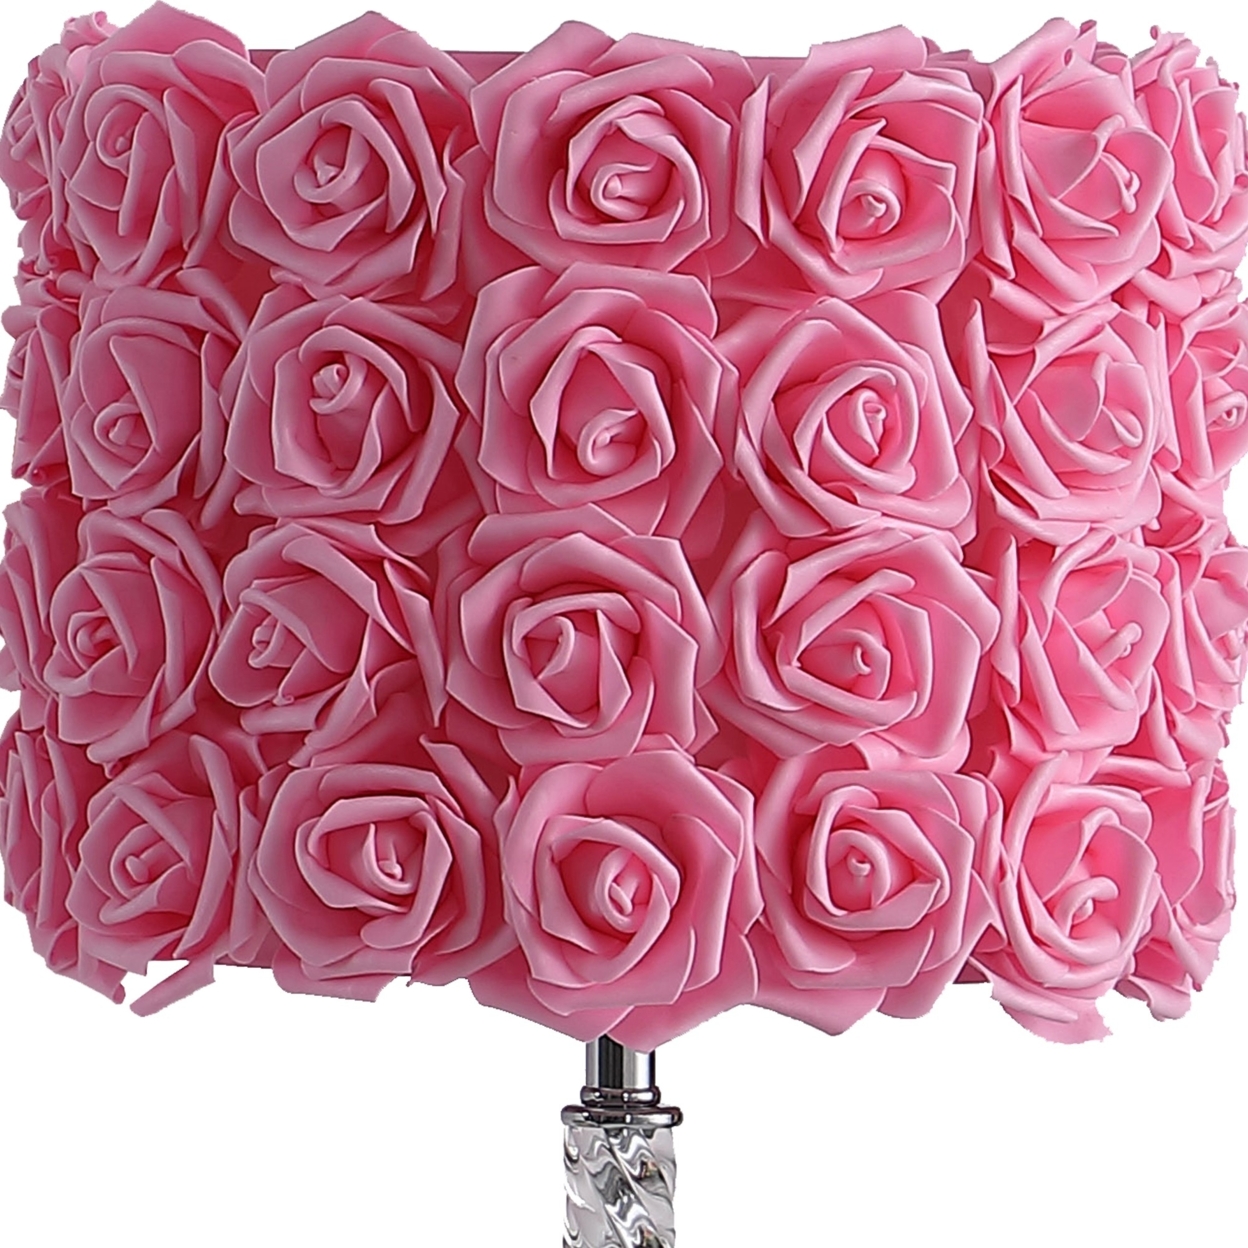 Bloom Roses Drum Shade Table Lamp With Twisted Acrylic Base, Pink- Saltoro Sherpi